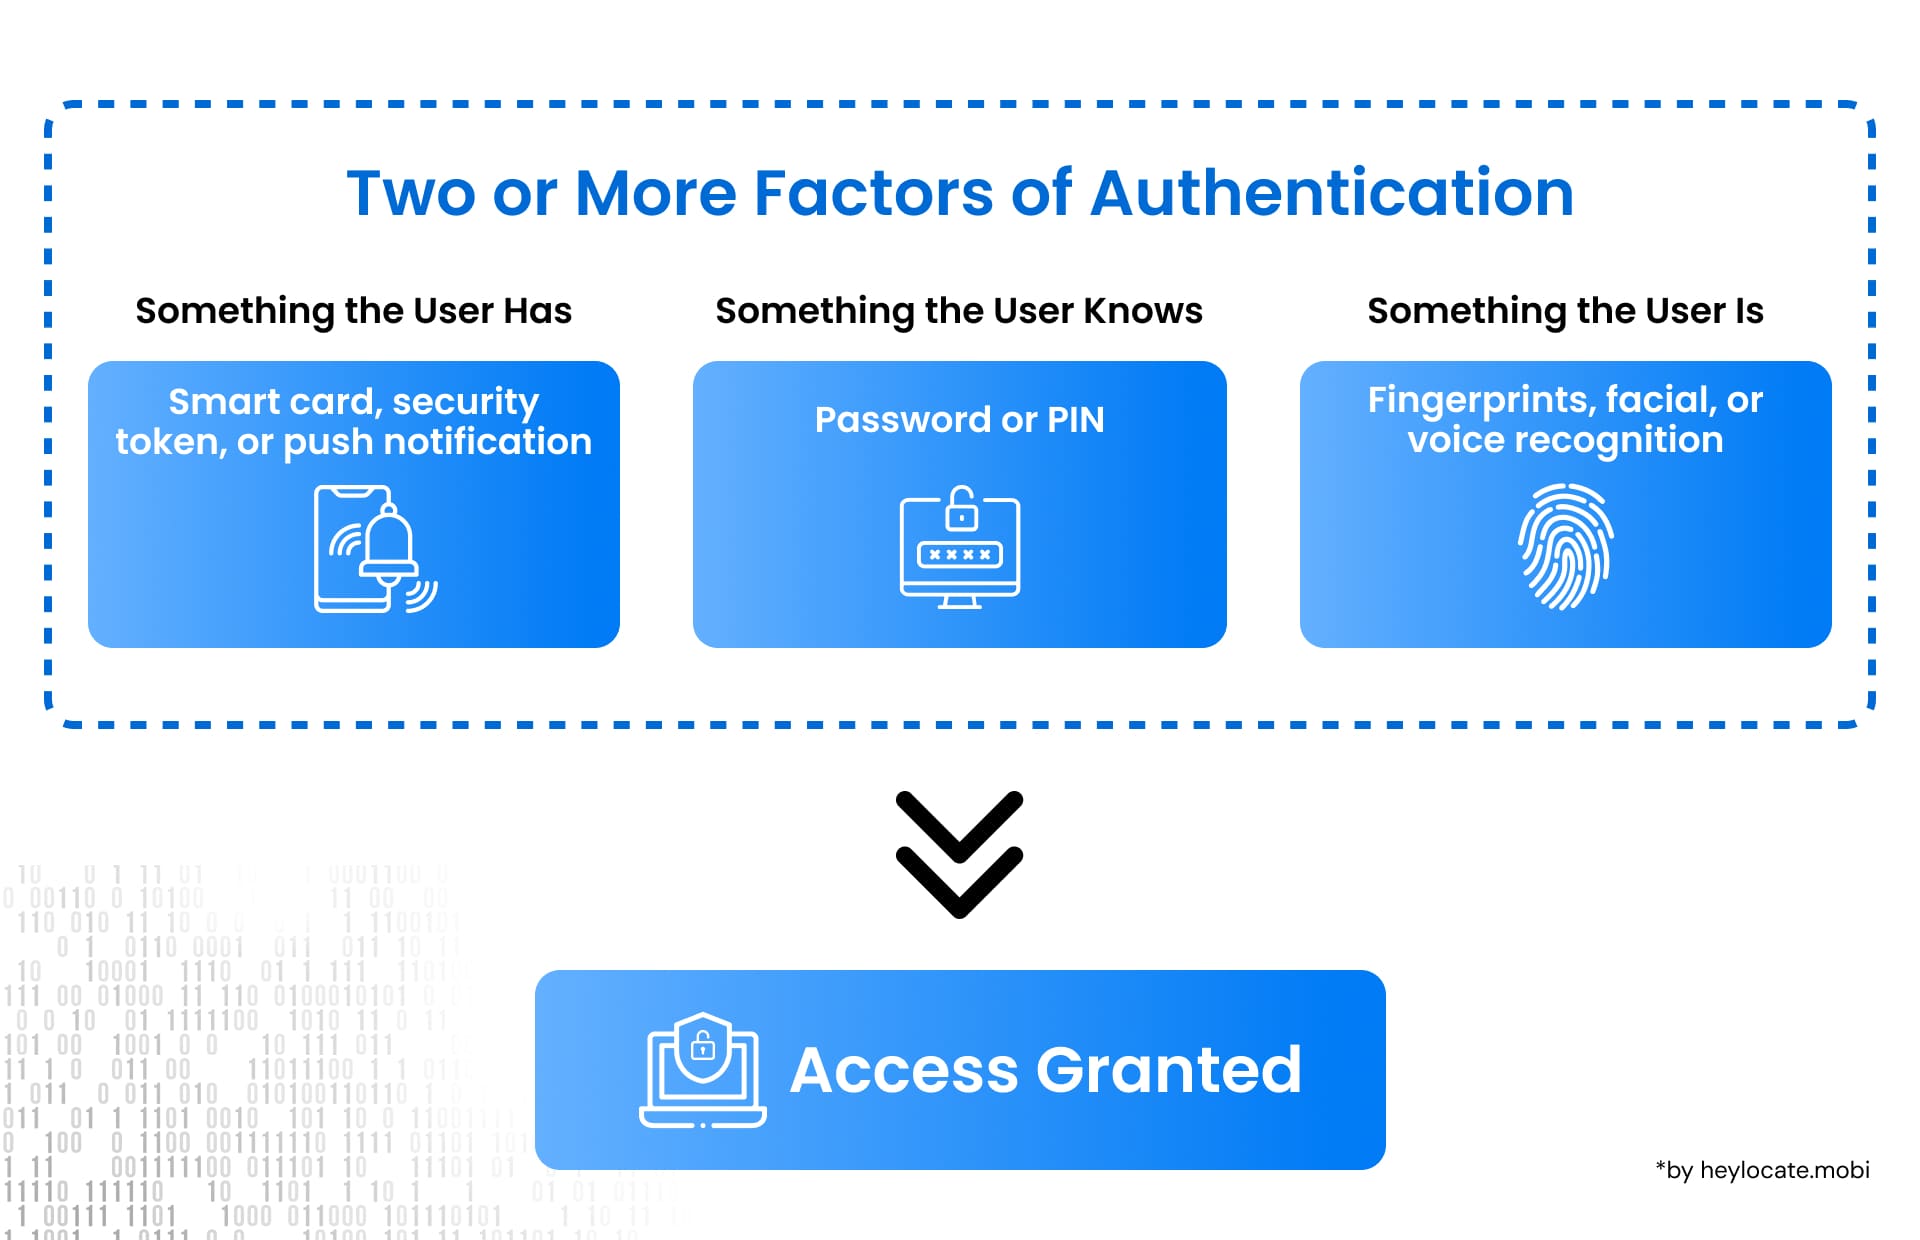 Graphic illustrating various two-factor authentication methods, including Passwords/Passphrases, Physical Tokens, PINs/PUKs, and Software Tokens